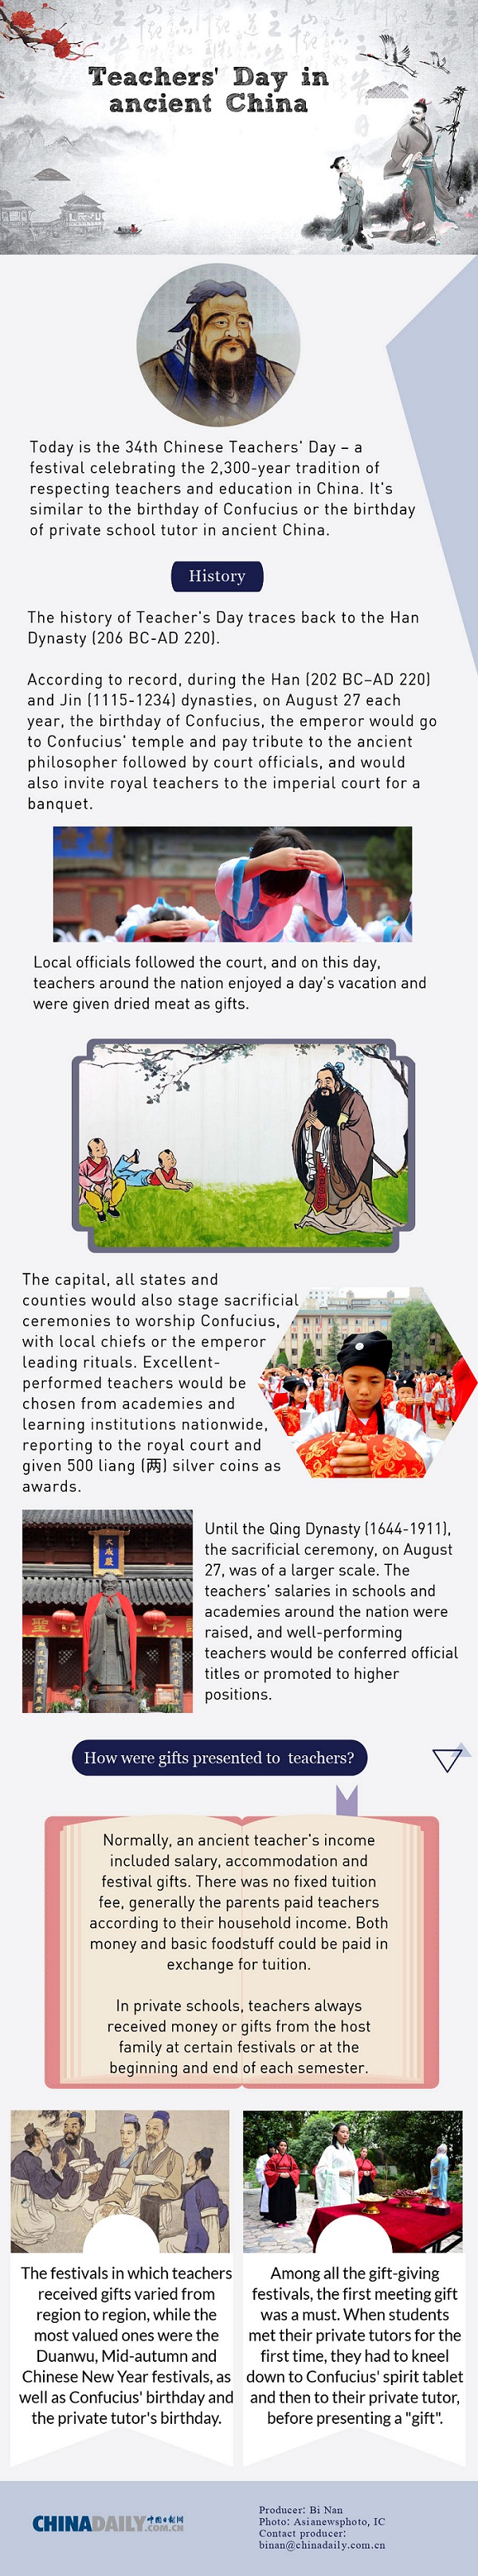 Culture Insider: Teachers' Day in ancient China